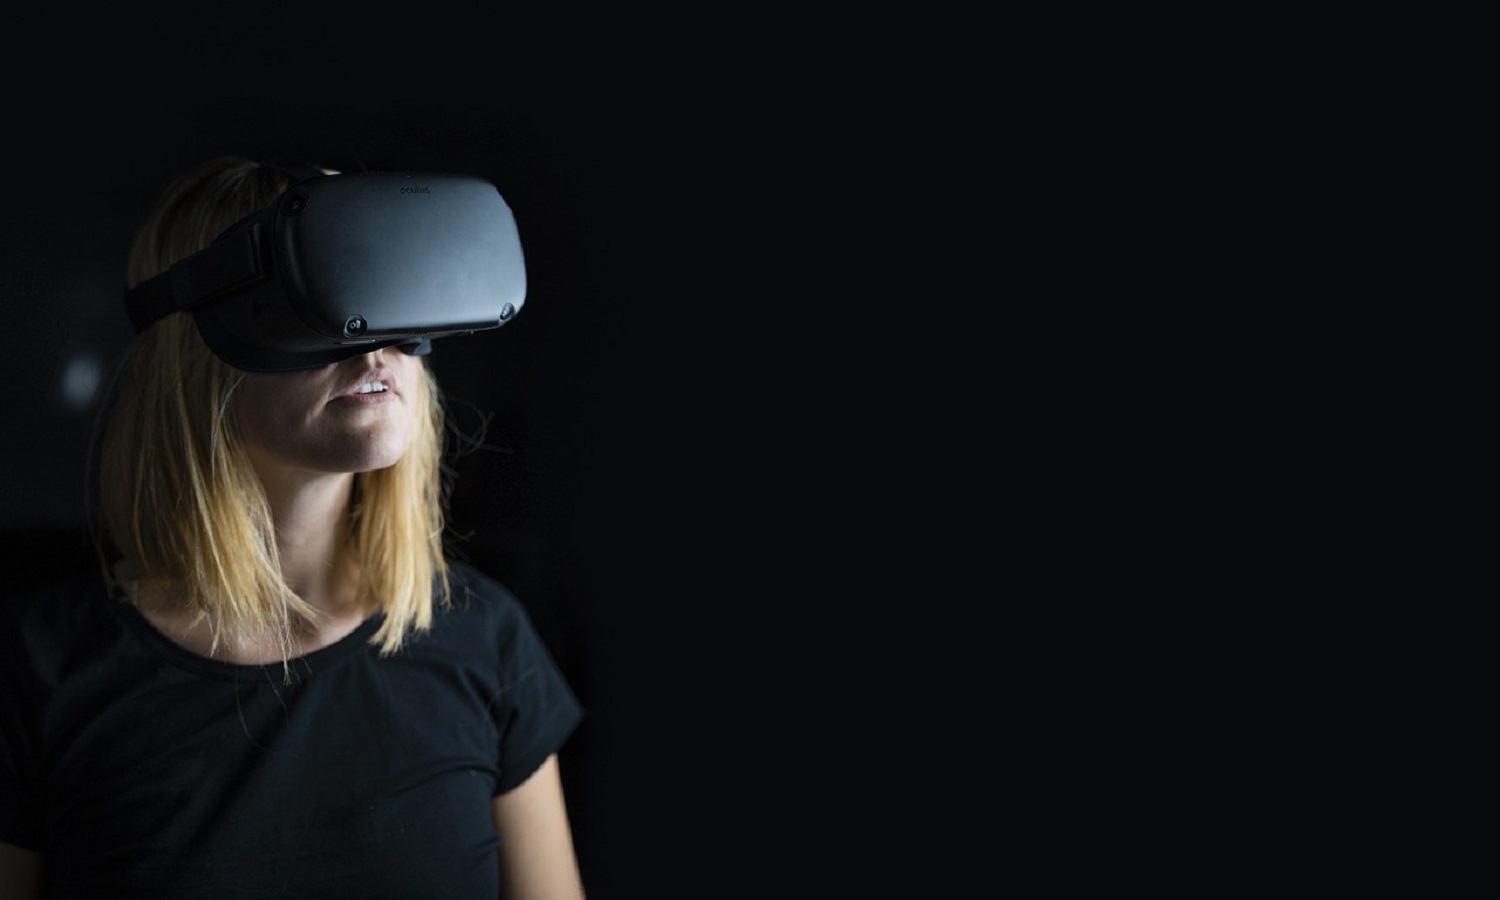 Why Should Brands Leverage Virtual Reality?